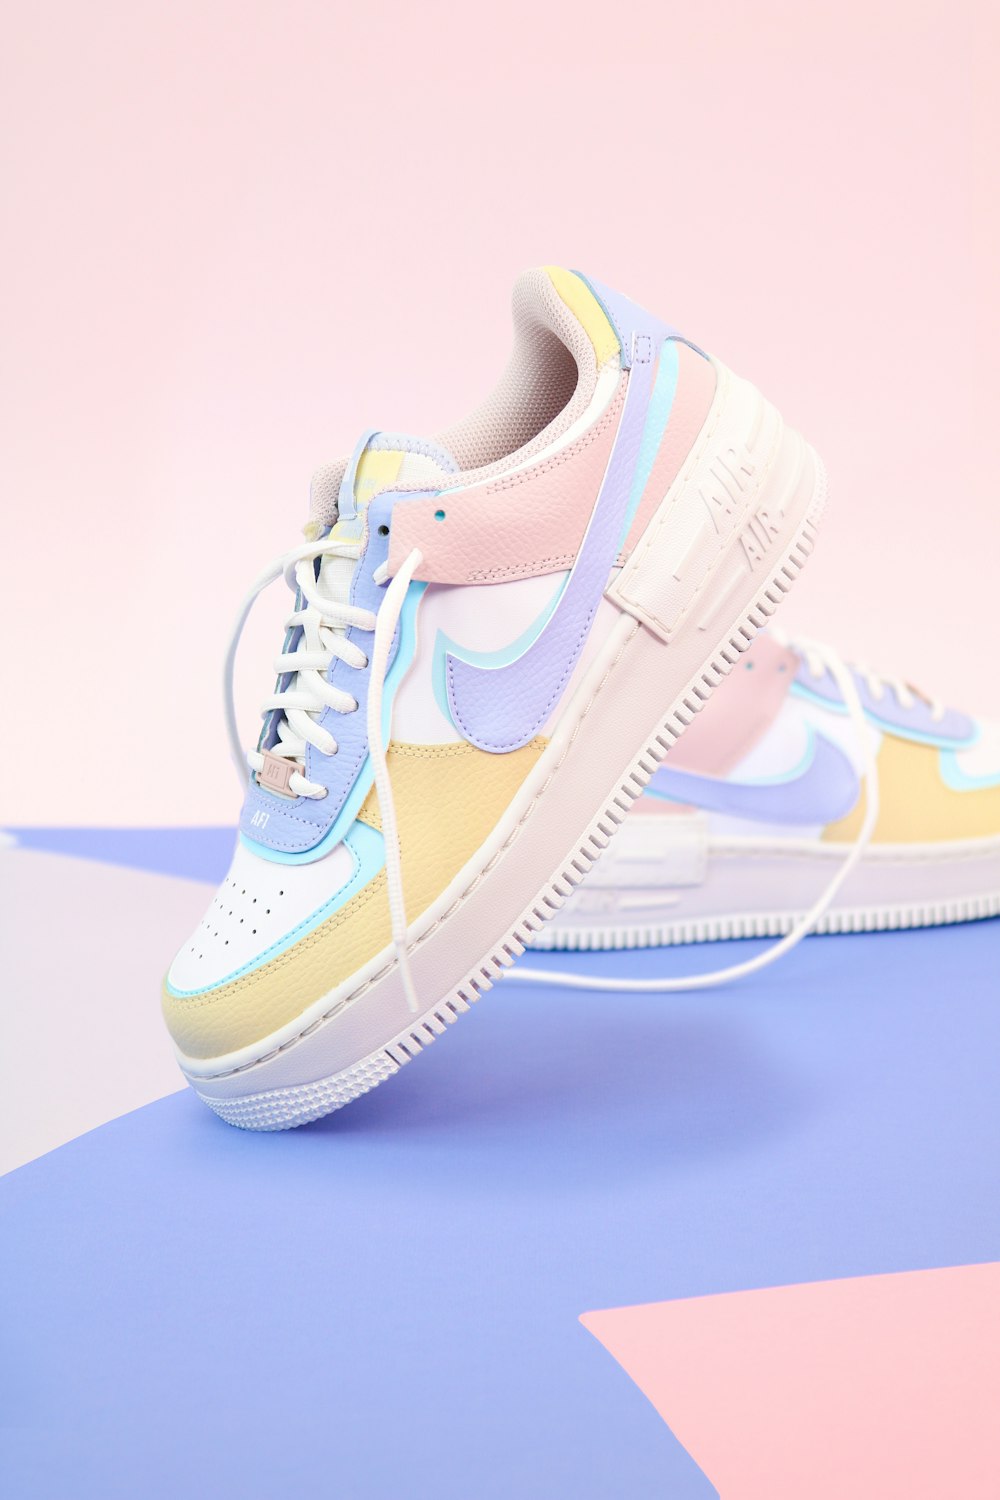 Nike Airforce 1 Pictures | Download Free Images on Unsplash